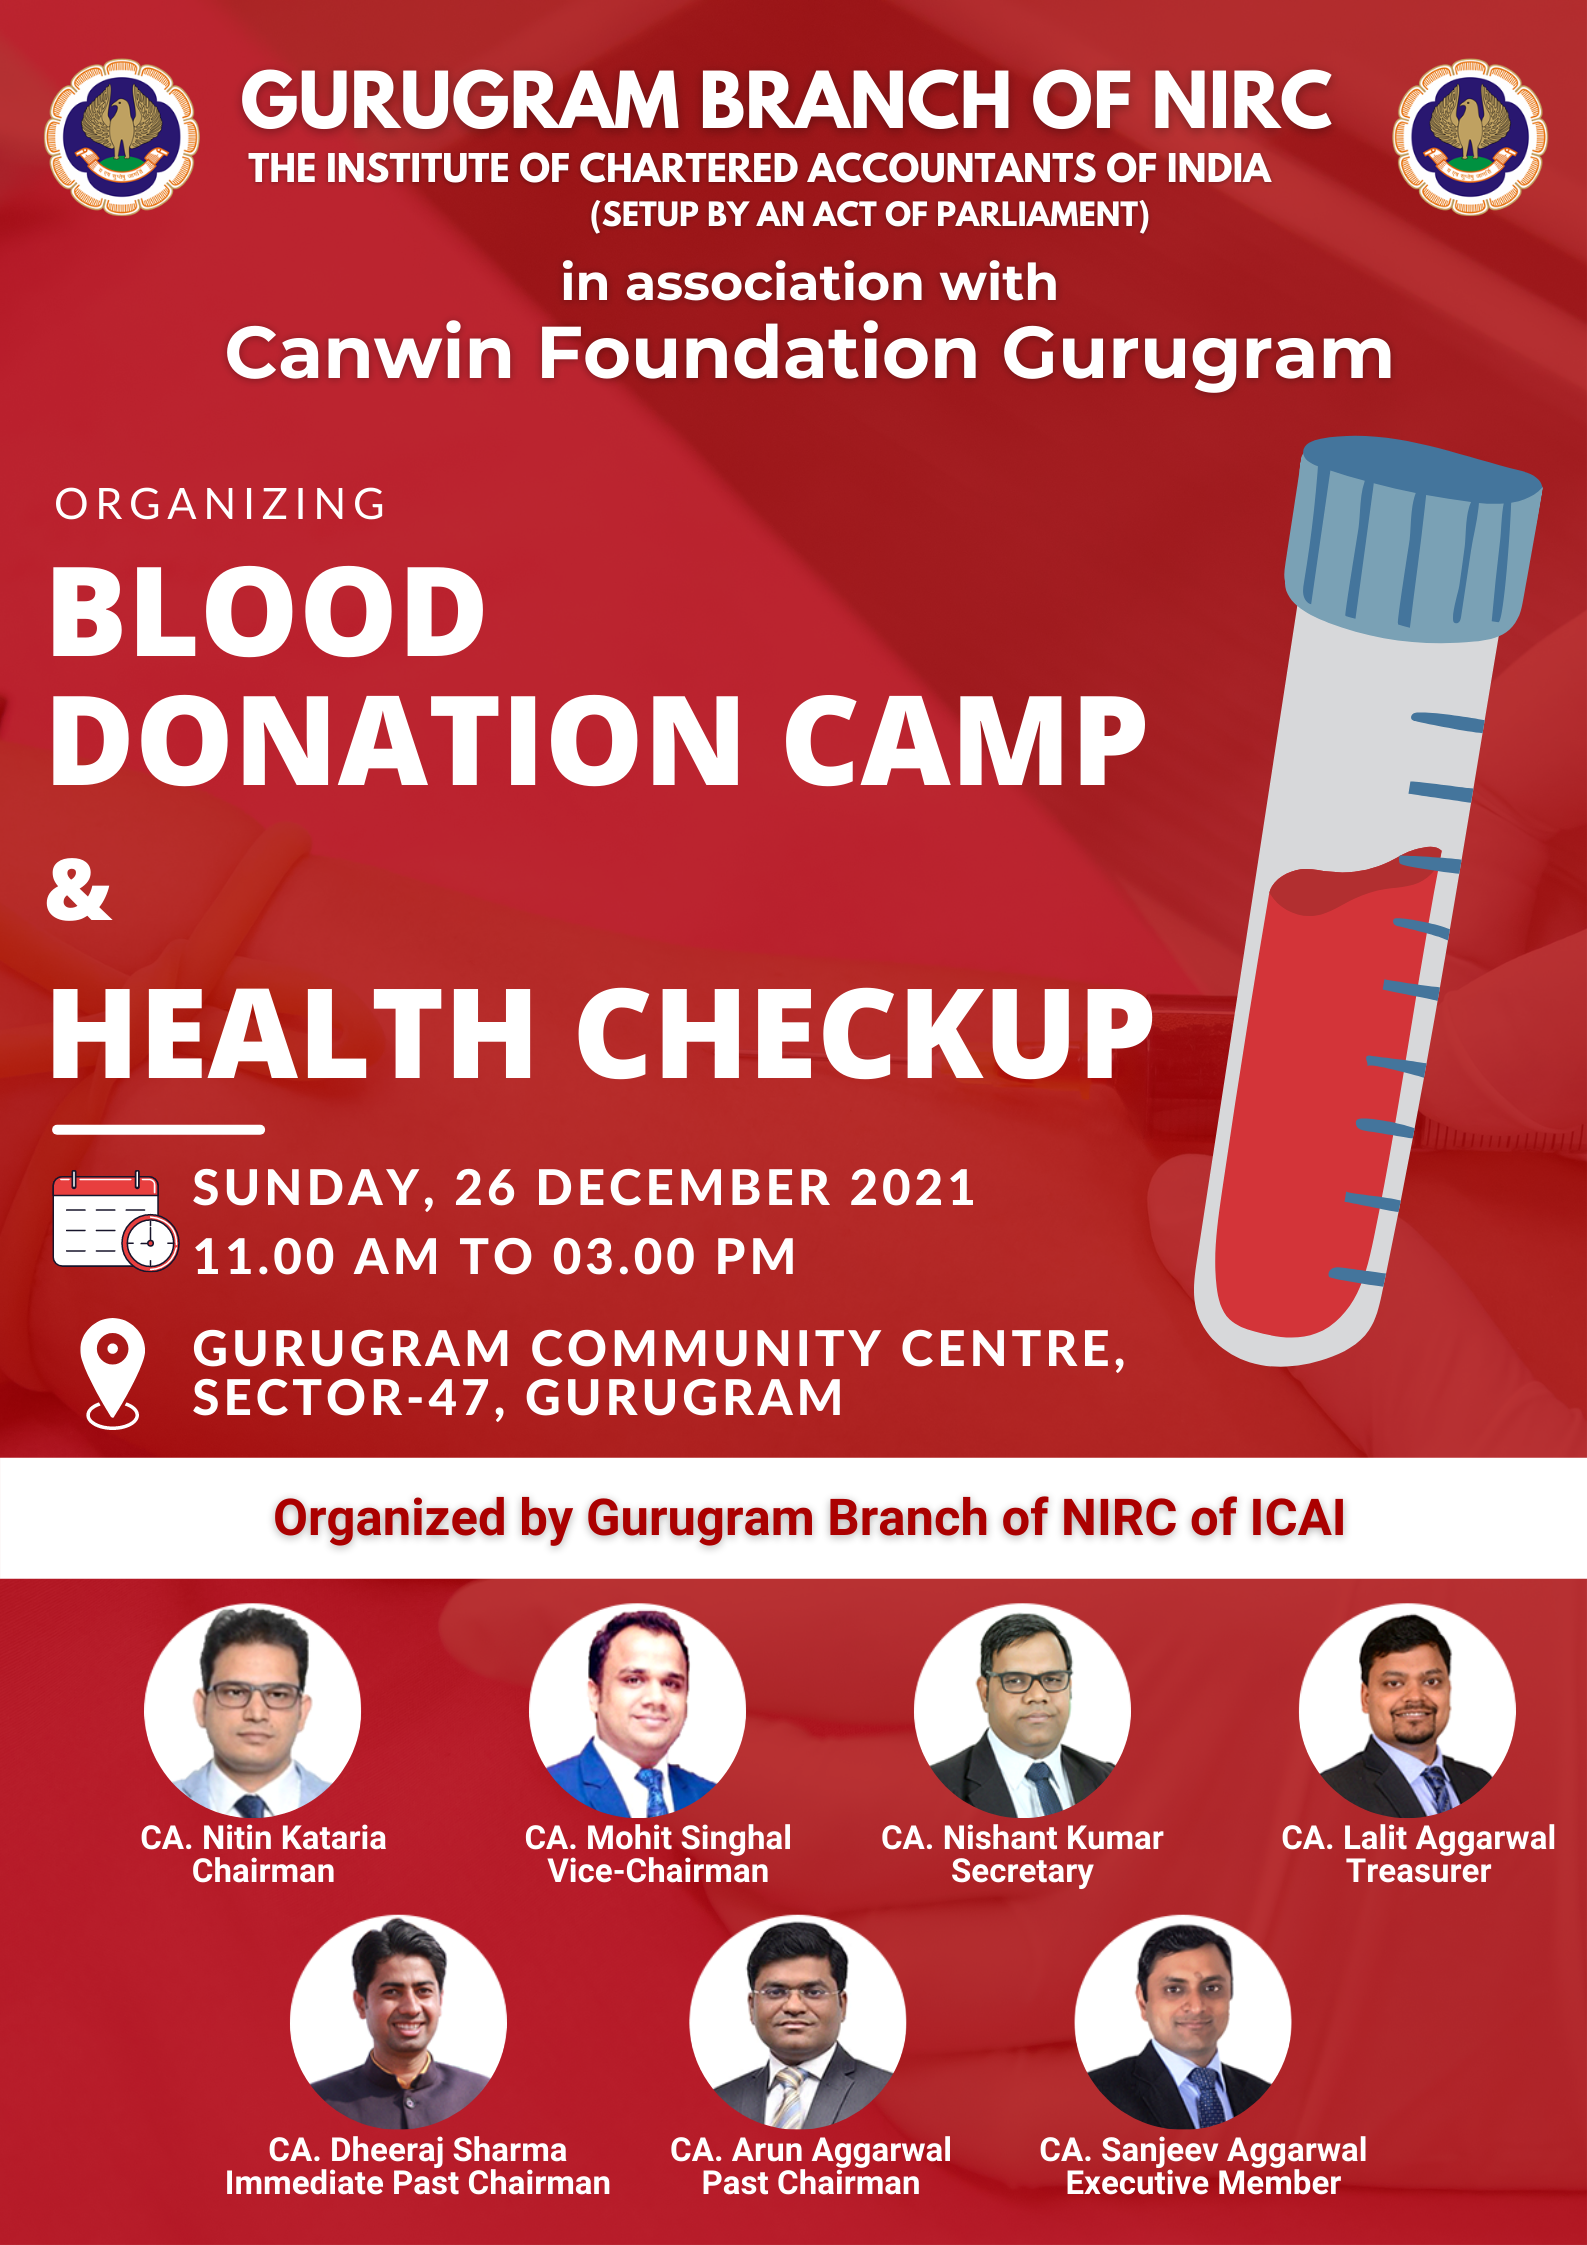 Complete Health Checkup and Blood Donation Camp